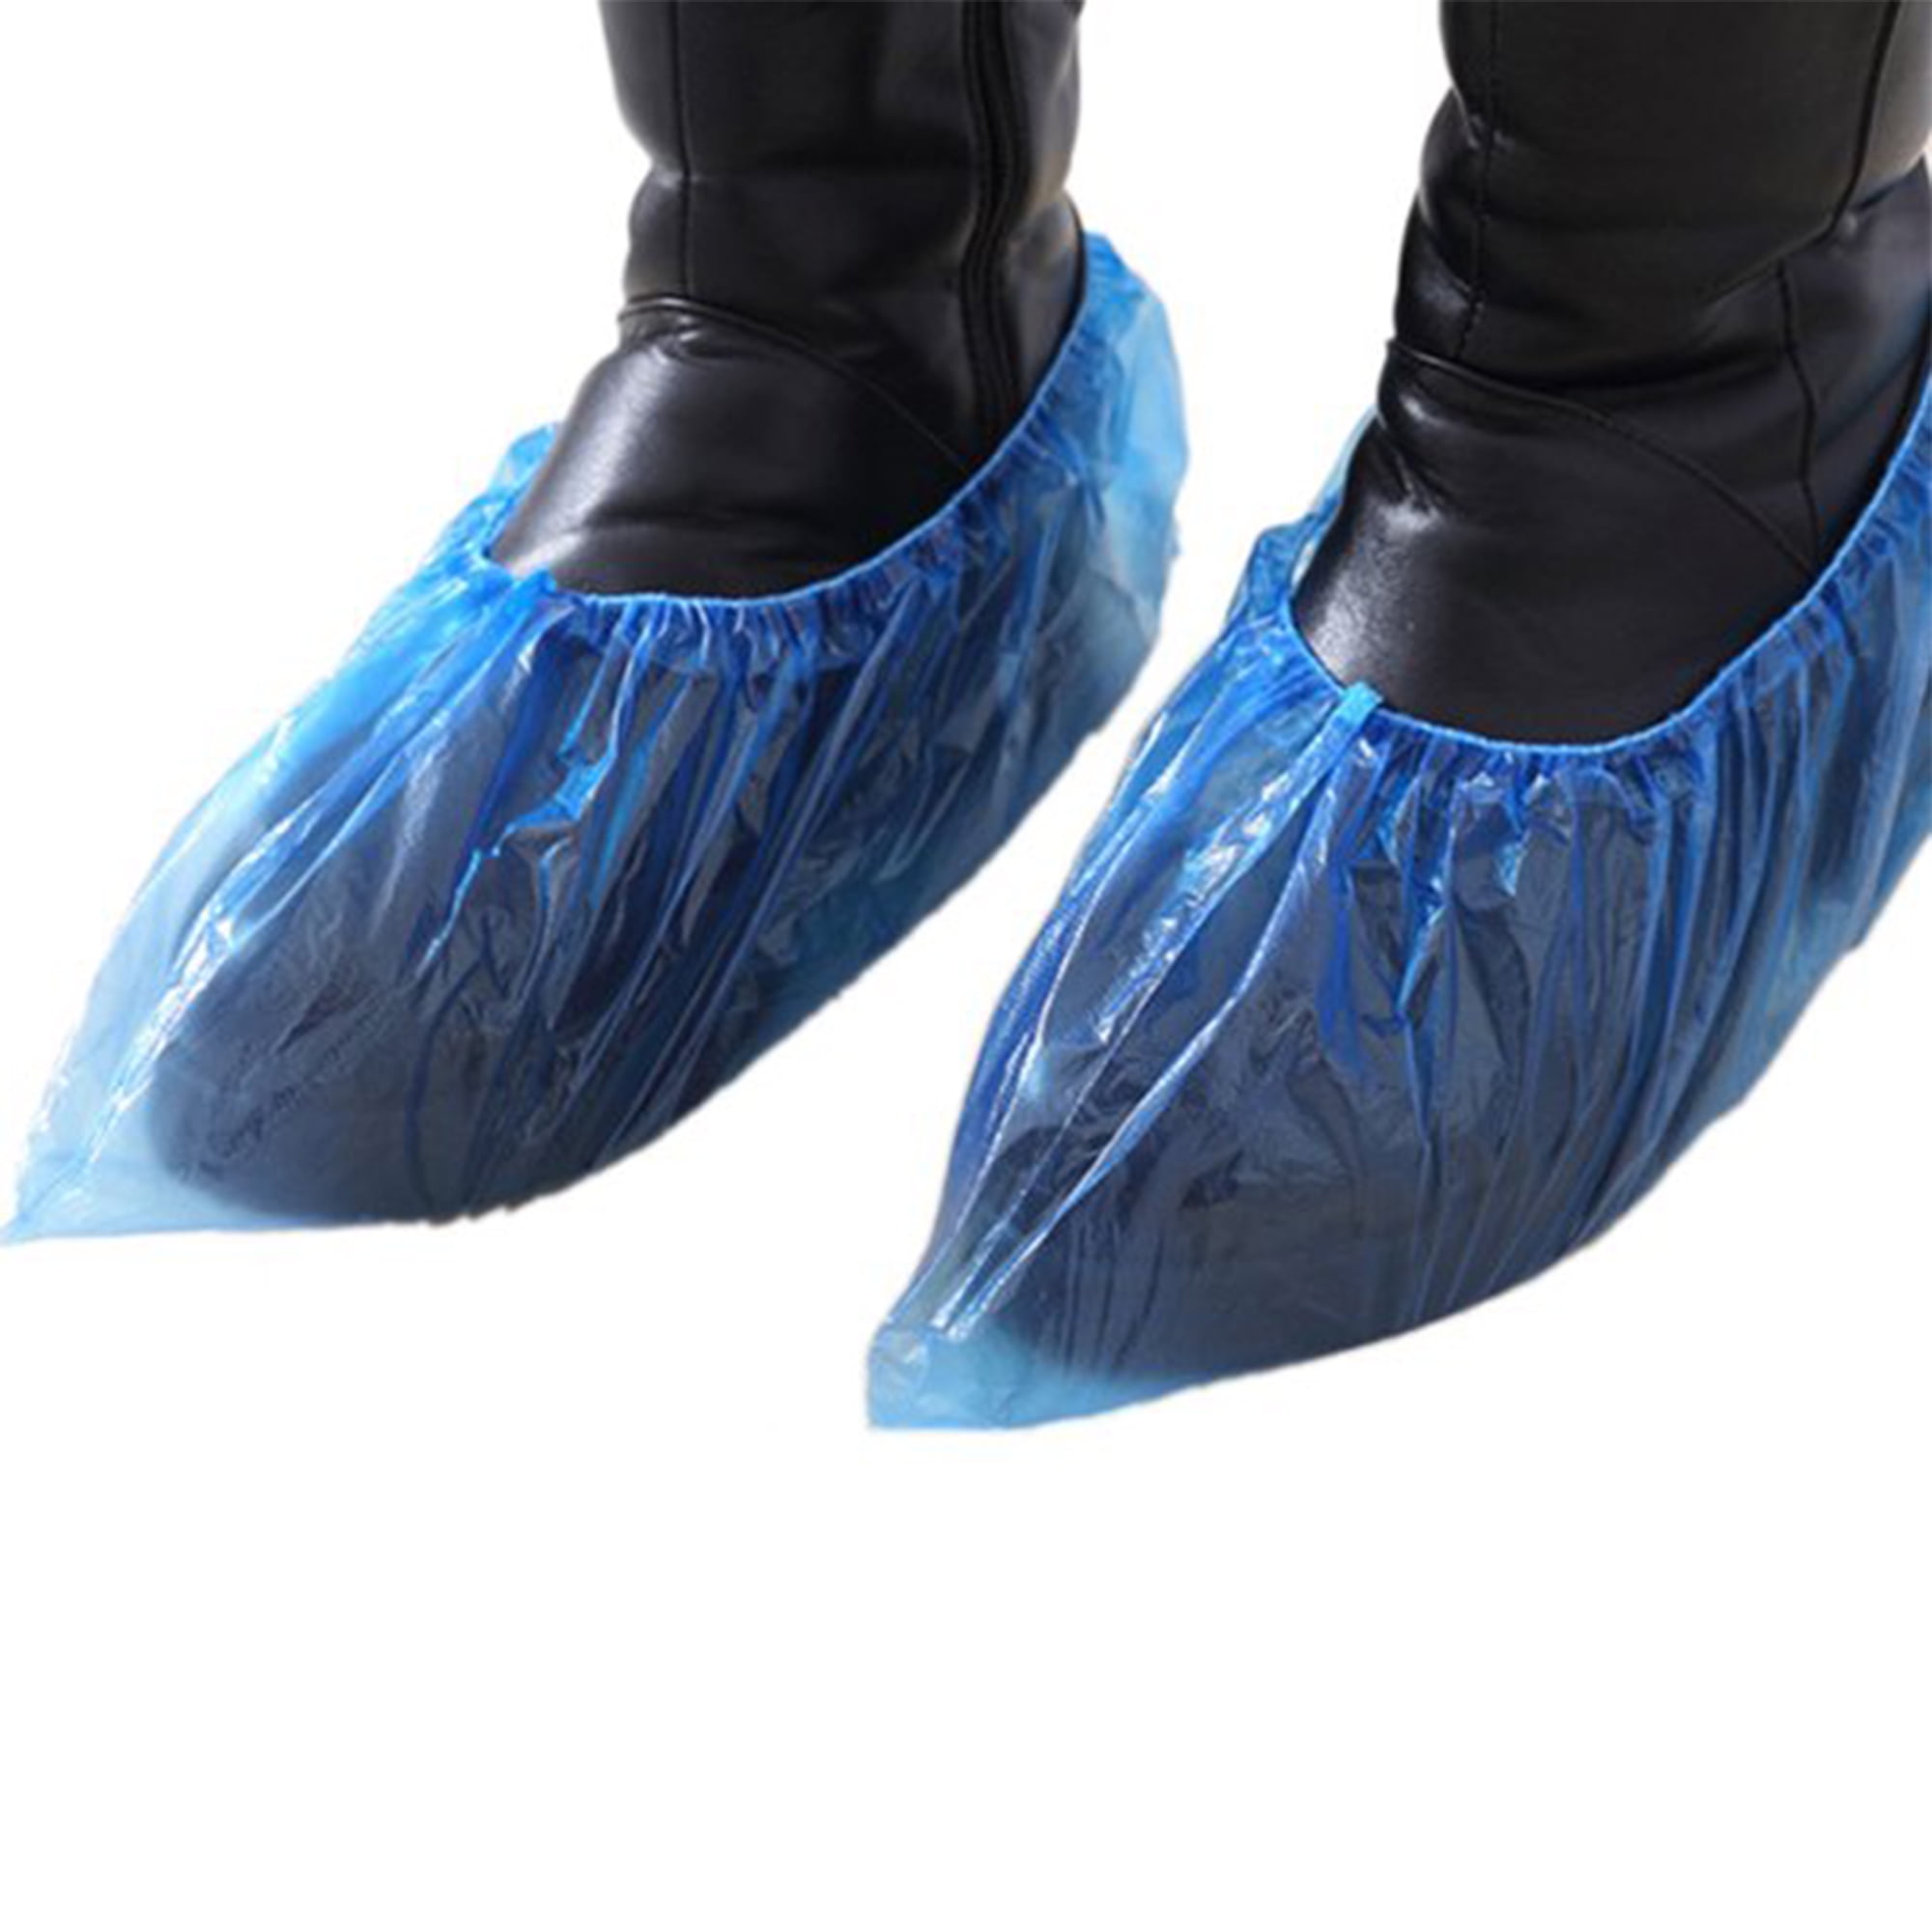 100Pcs Plastic Waterproof Disposable Shoe Covers Blue Shoe Covers Overshoes Boot 